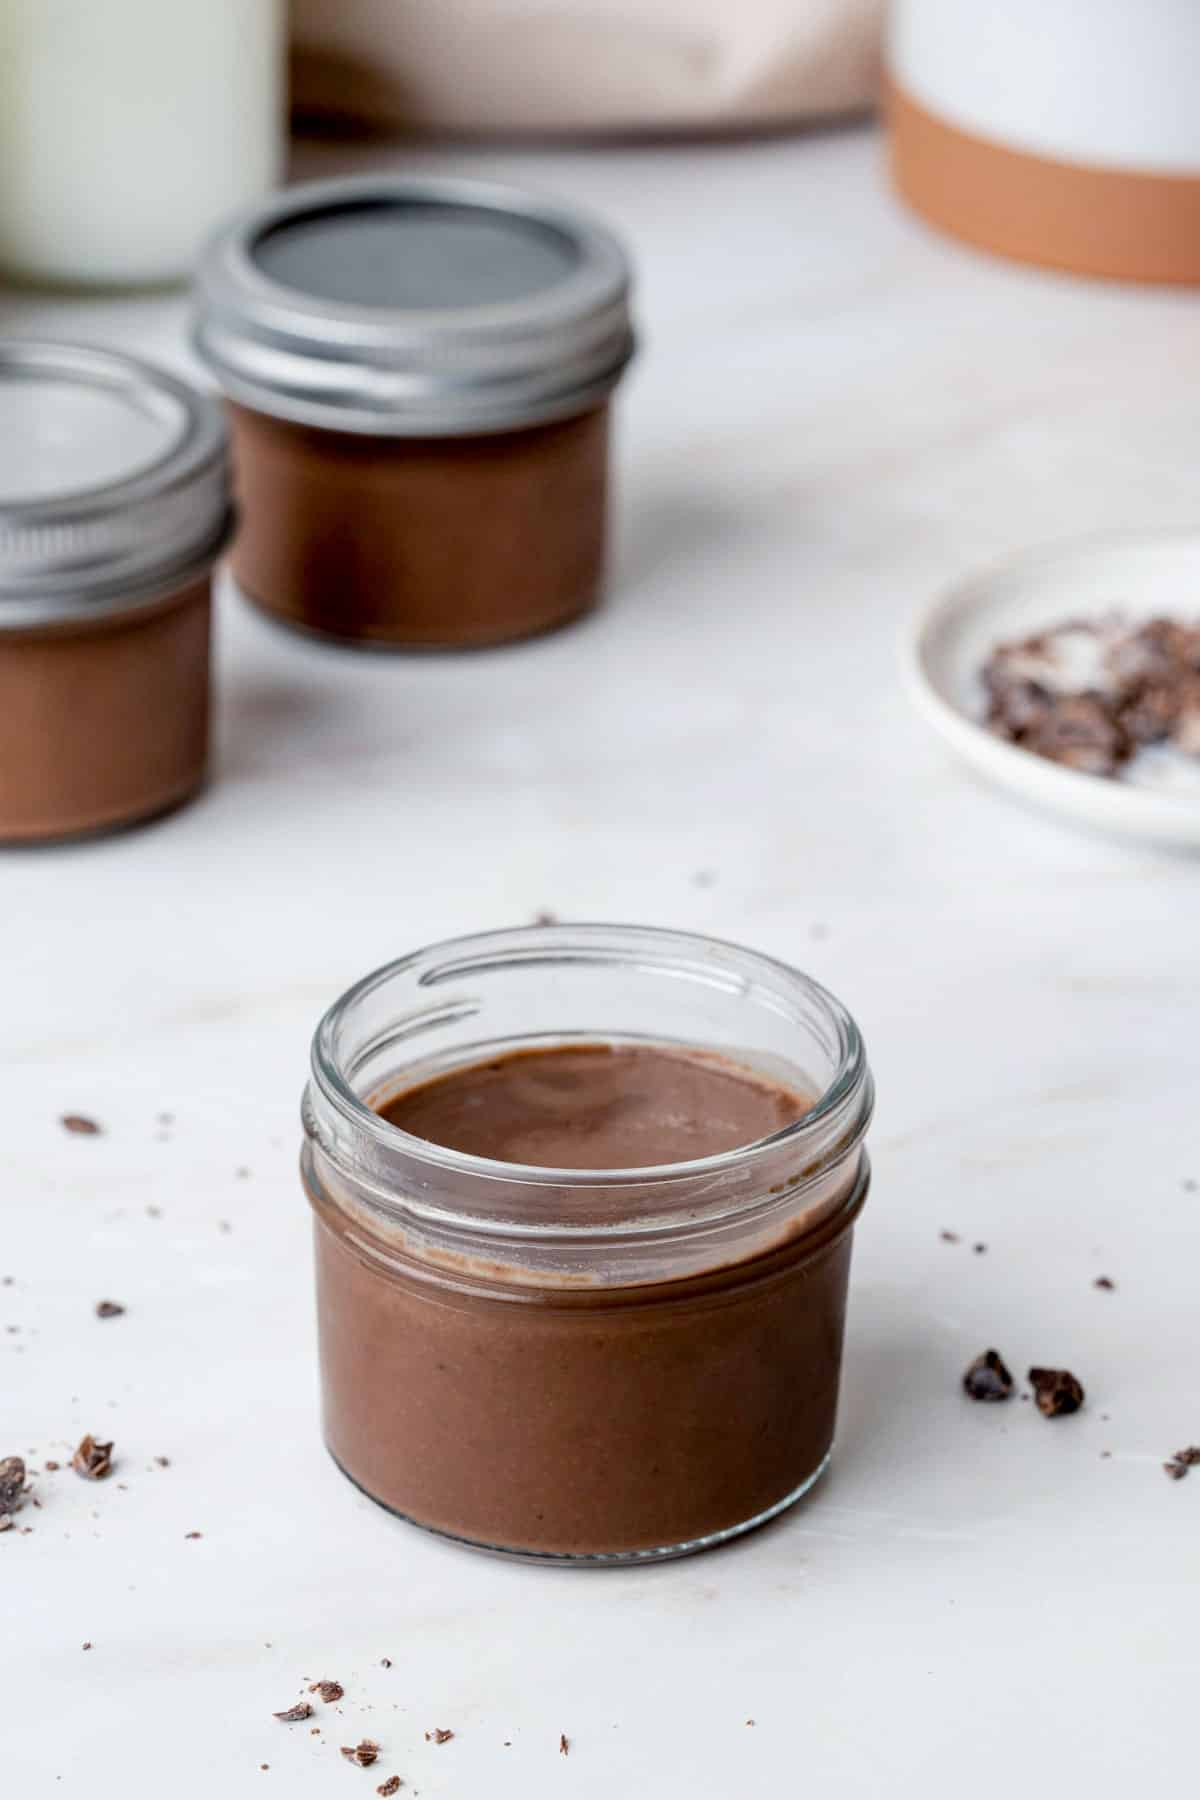 chocolate creme in a jar on a white table top